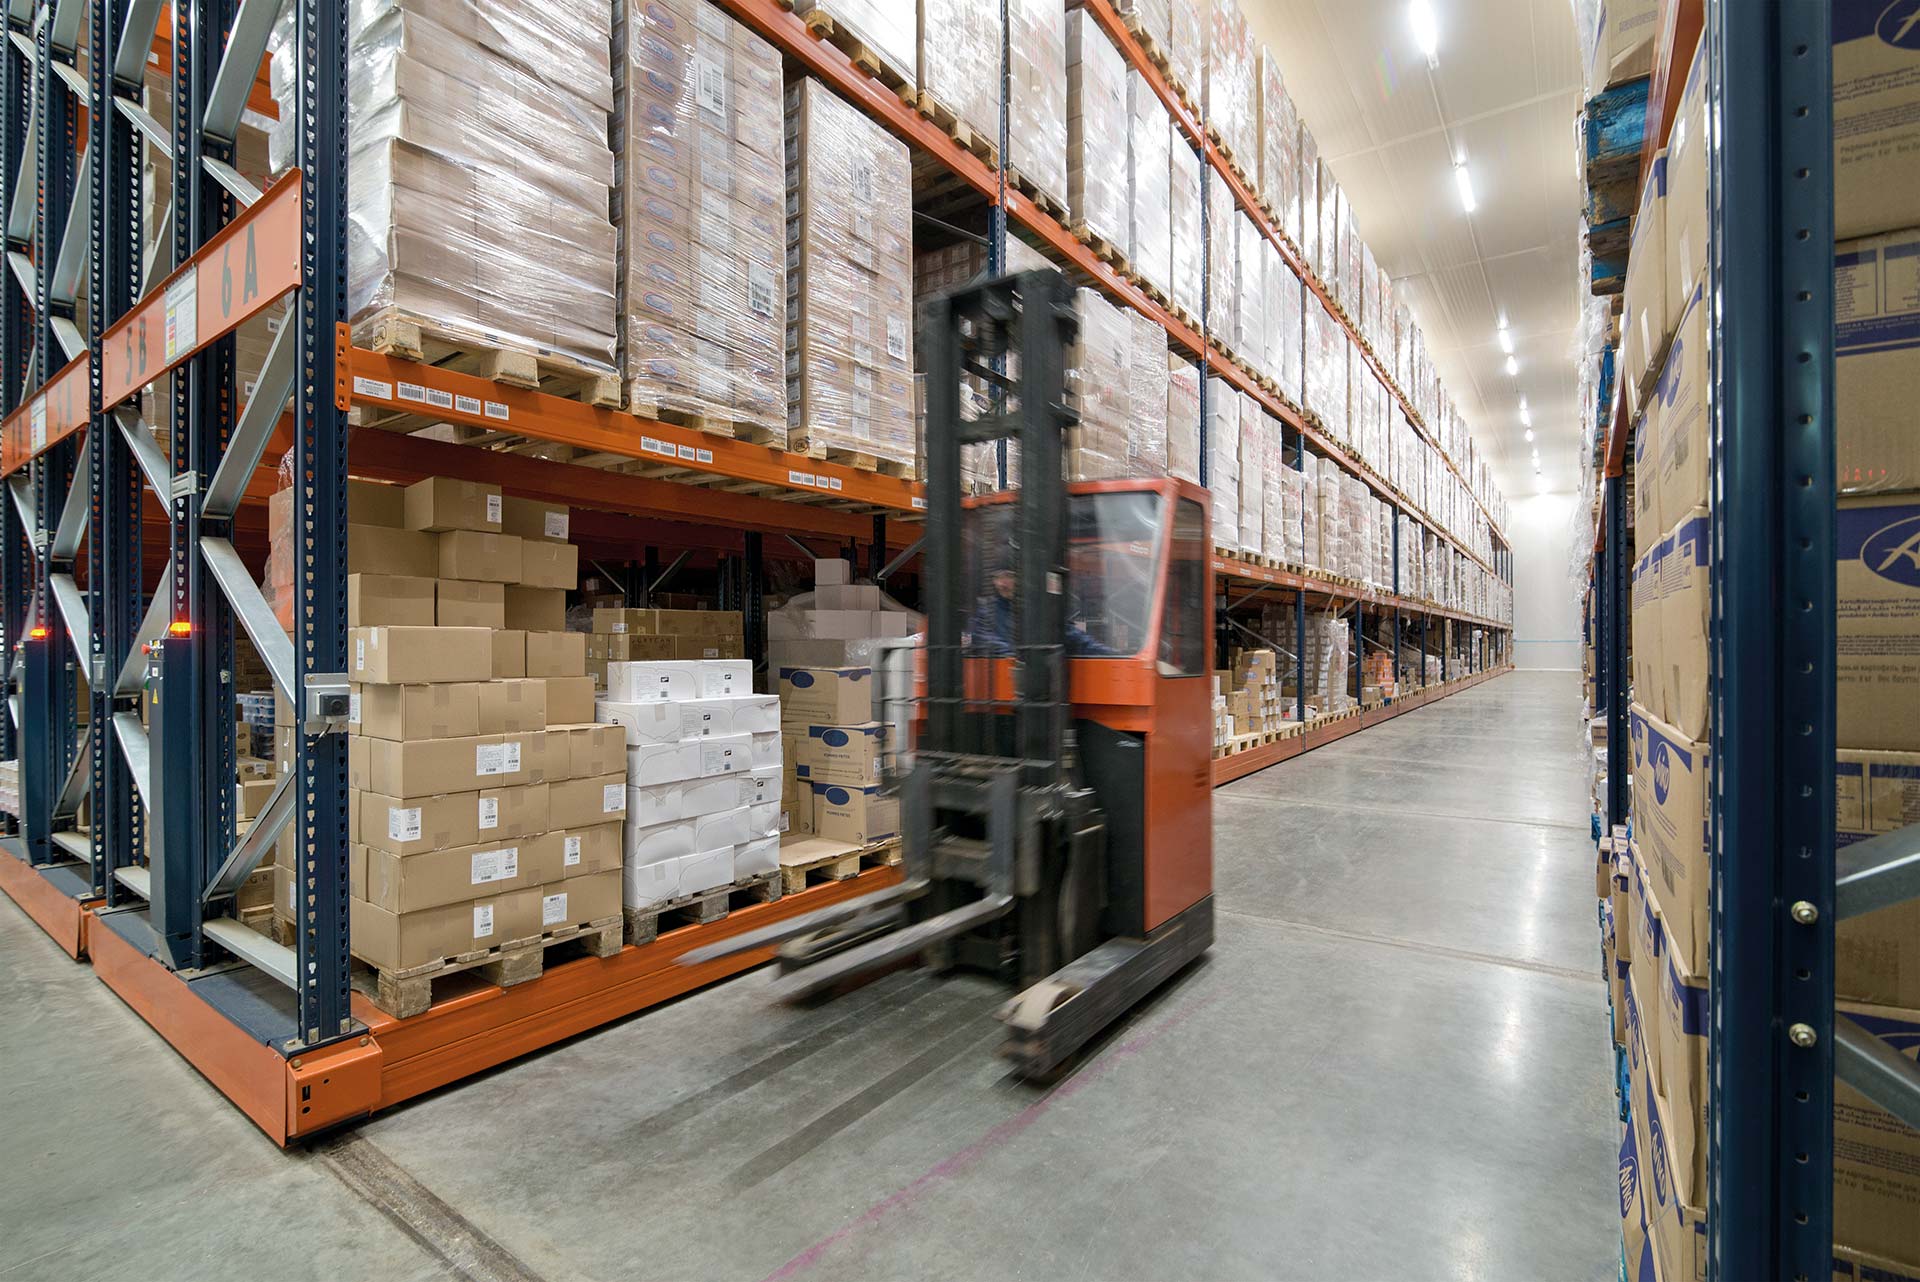 The forklifts access the inside of the mobile racking via the working aisle